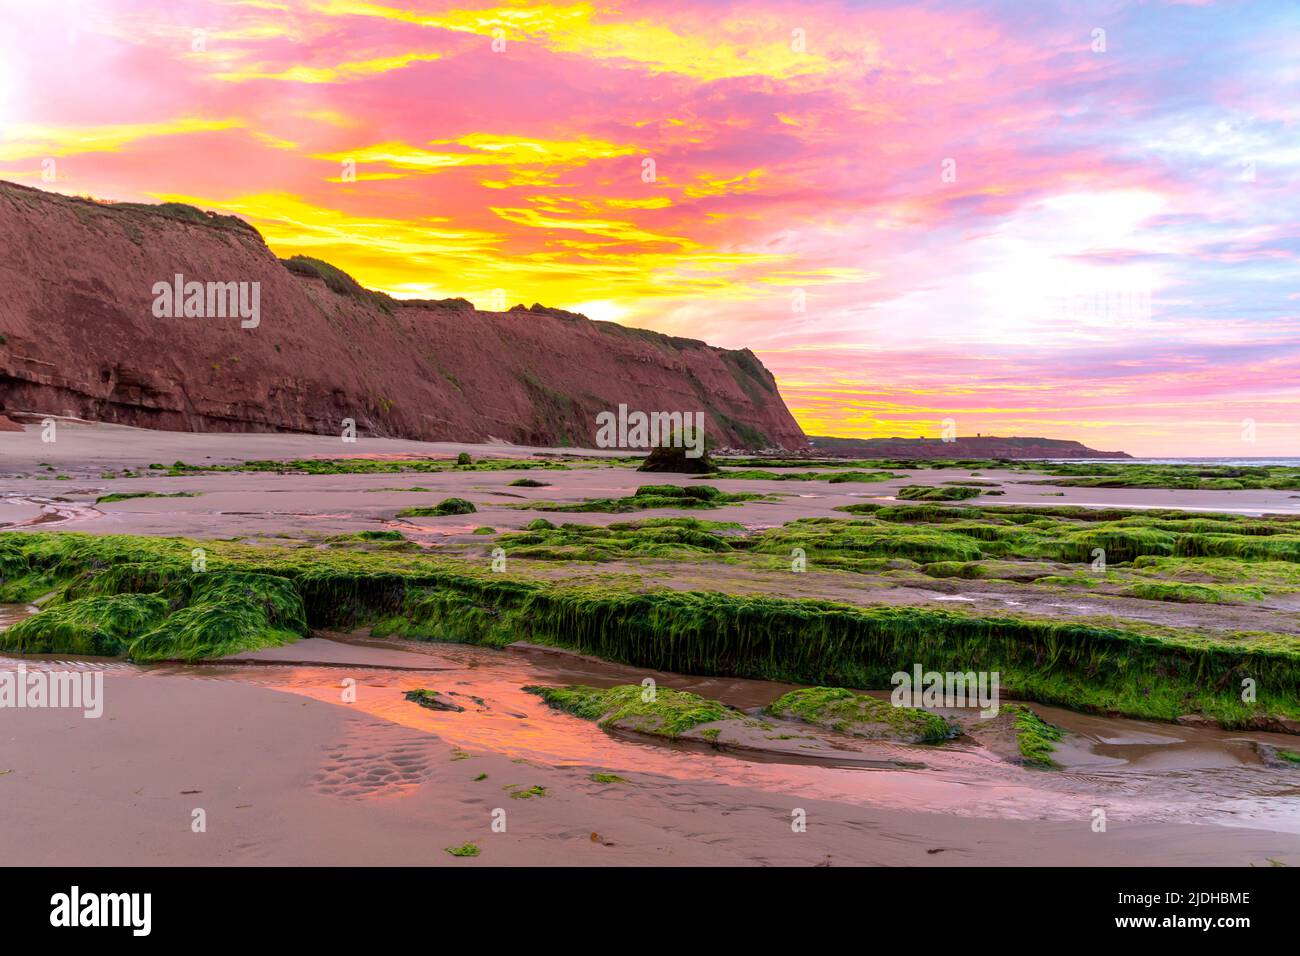 Sunrise over cliffs and beach at low tide, Orcombe Point, South Devon. Stock Photo